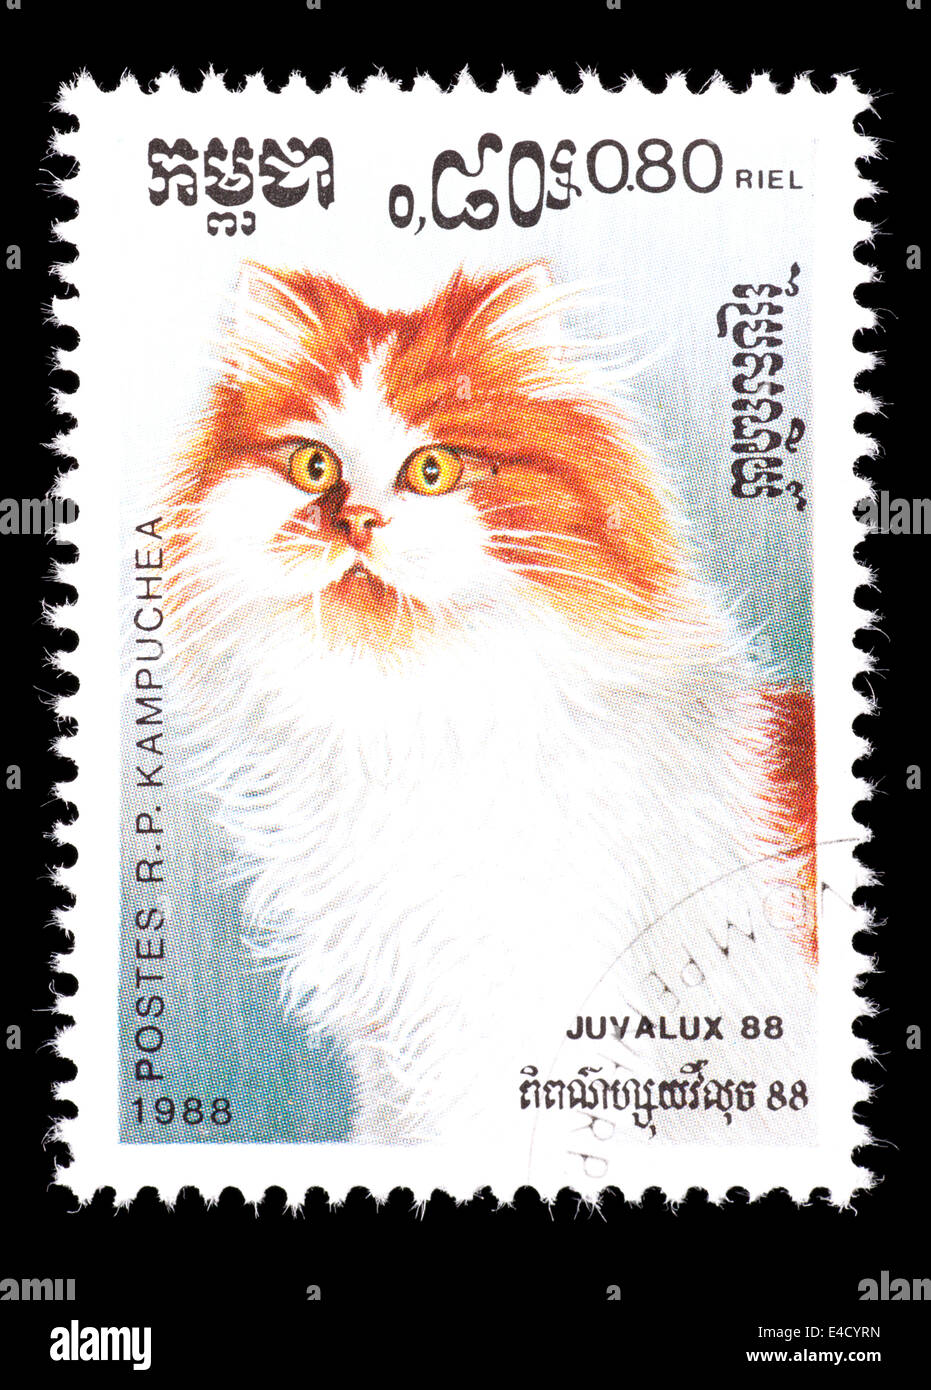 Postage stamp from Cambodia (Kampuchea) depicting a domesticated cat. Stock Photo